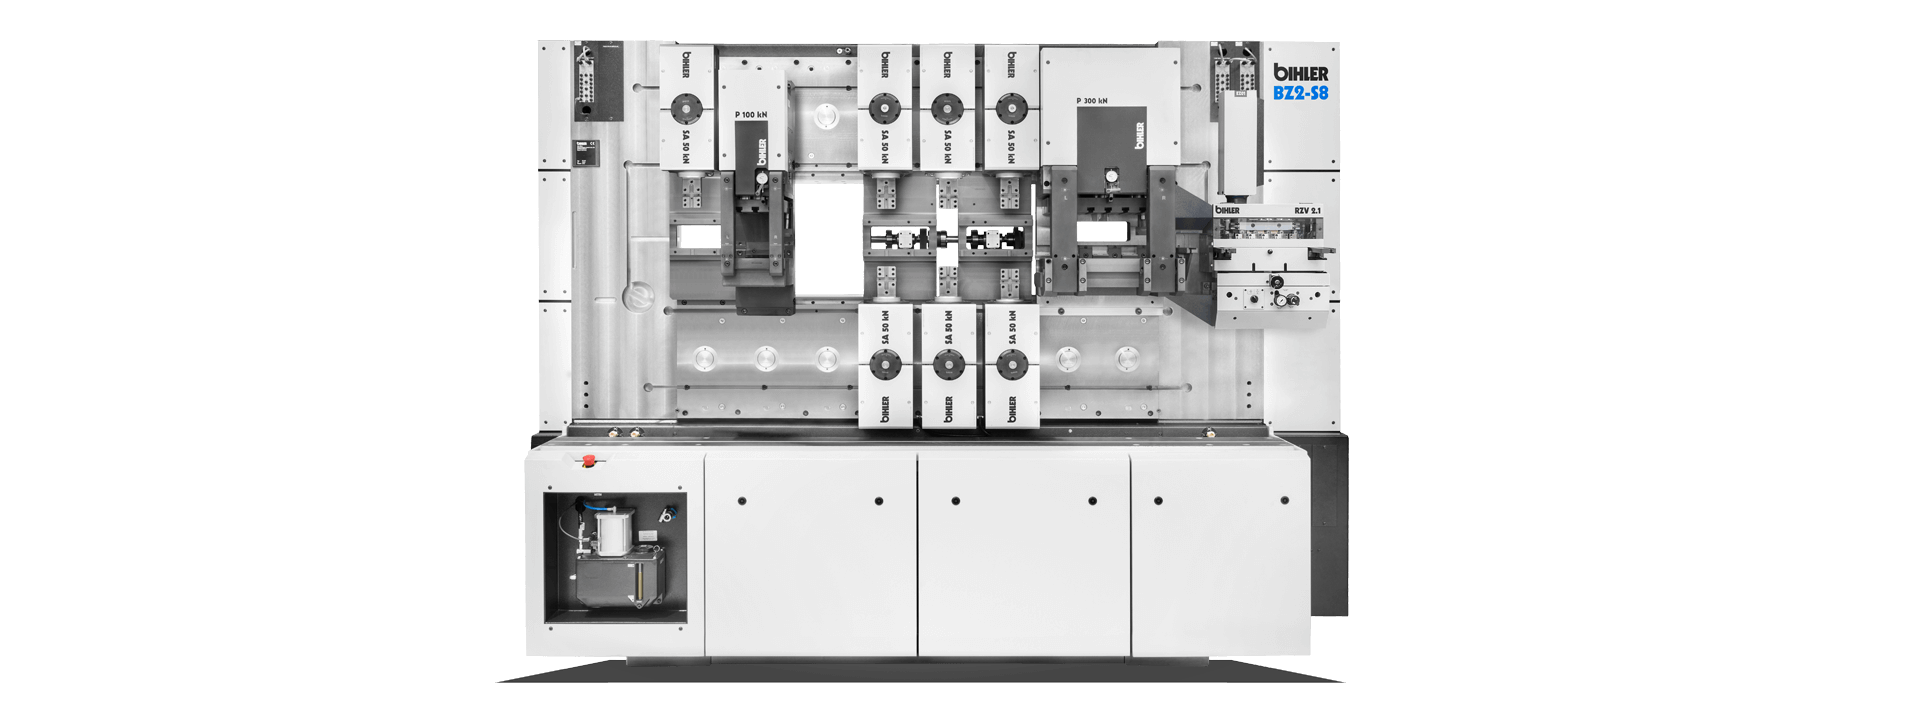 Bihler Processing Center BZ2-S8 for stamped and formed parts and sub-assemblies